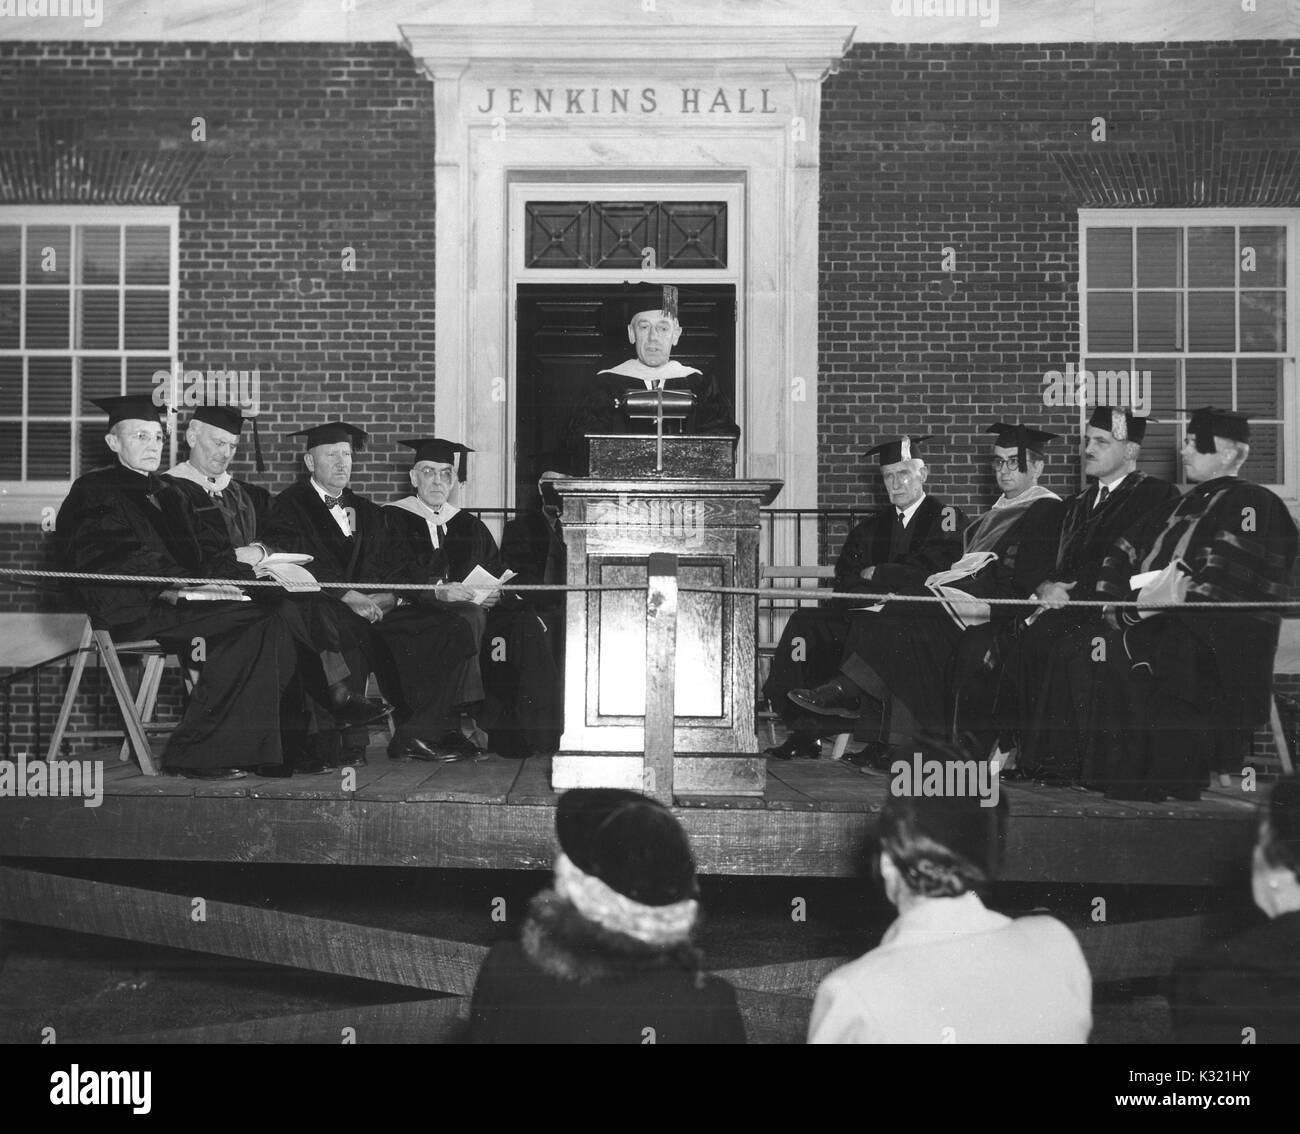 American scientist Detlev Wulf Bronk stands at a podium while speaking in front of Jenkins Hall, an academic building on the Homewood campus of Johns Hopkins University, where he served as president, in Baltimore, Maryland, 1950. Stock Photo